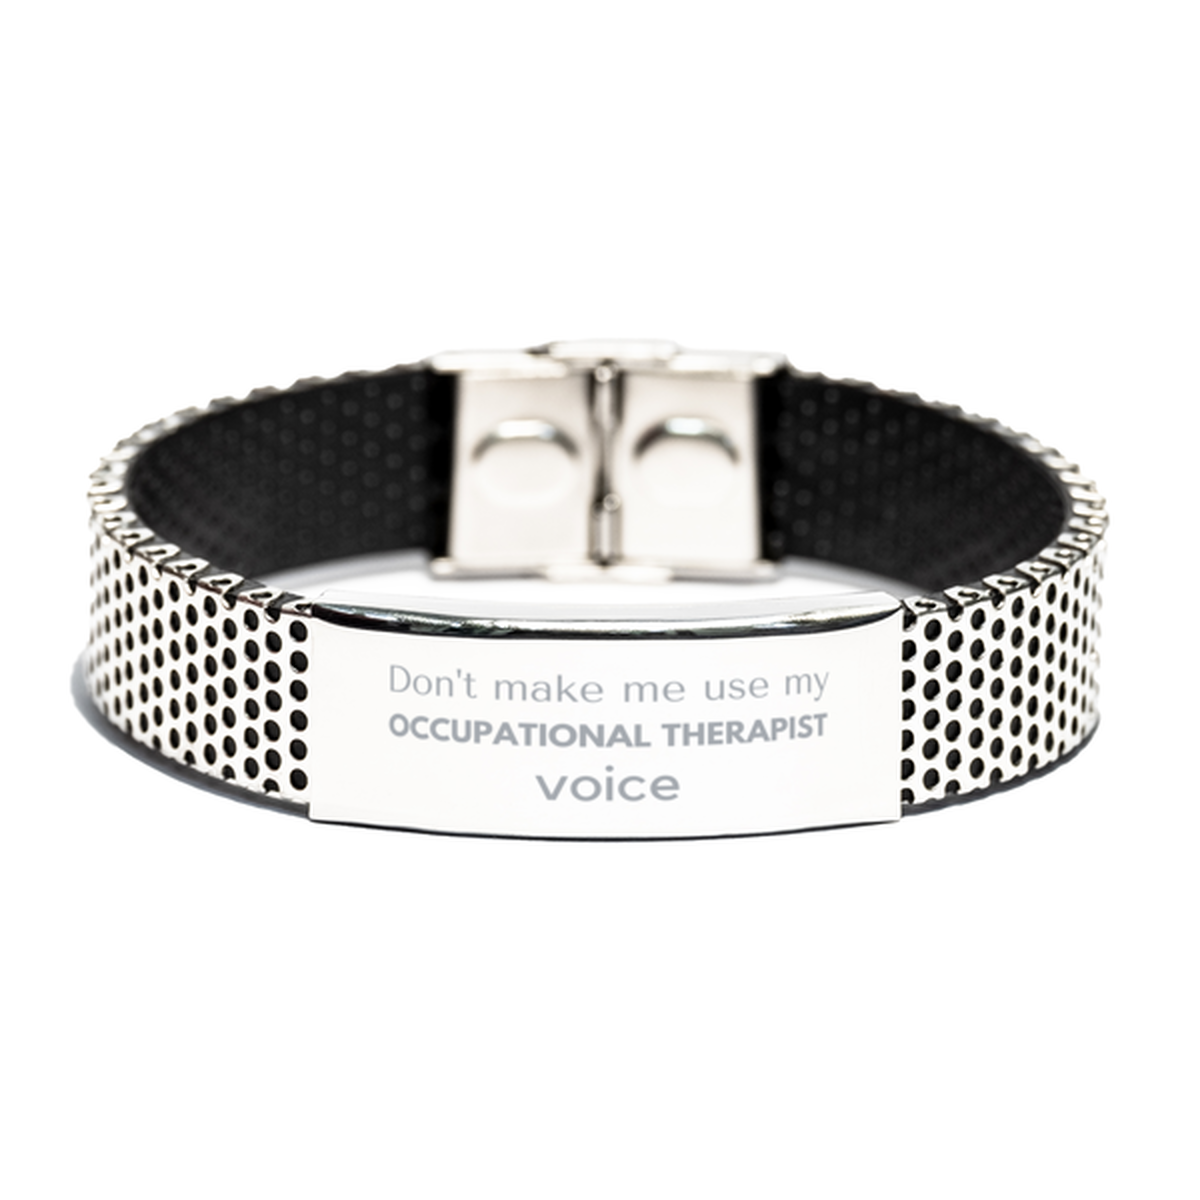 Don't make me use my Occupational Therapist voice, Sarcasm Occupational Therapist Gifts, Christmas Occupational Therapist Stainless Steel Bracelet Birthday Unique Gifts For Occupational Therapist Coworkers, Men, Women, Colleague, Friends